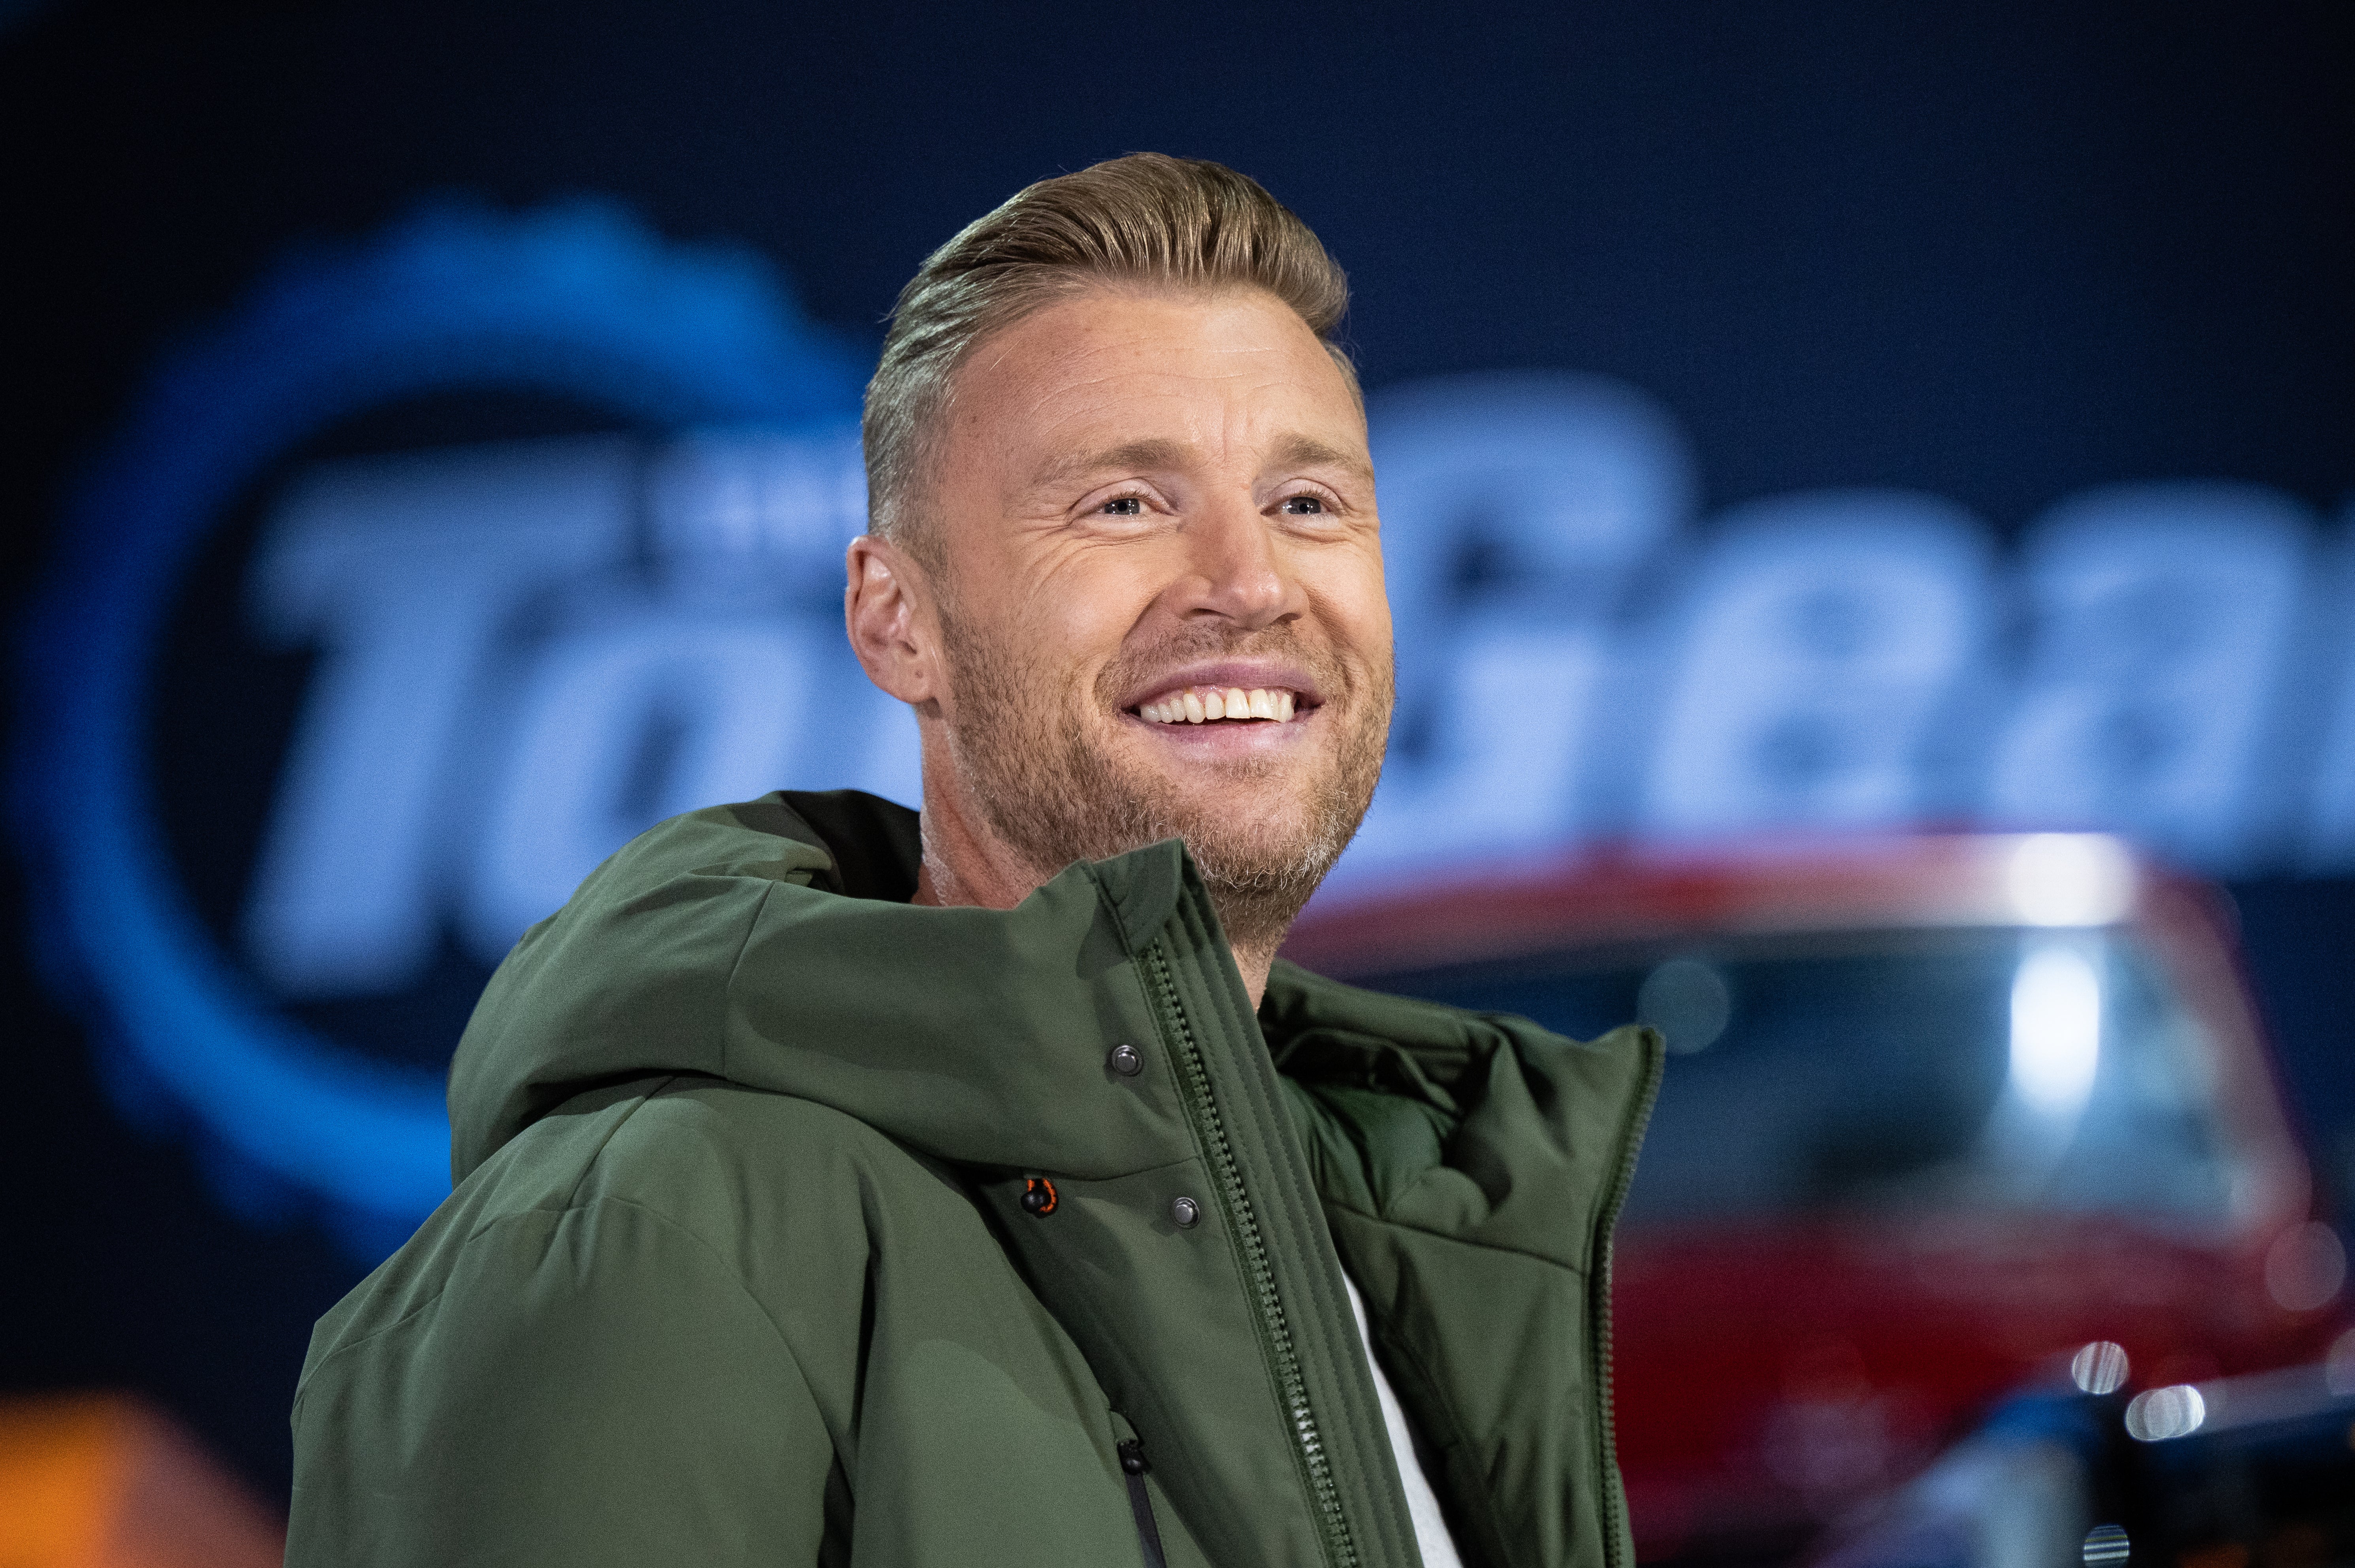 End of the road: Former England cricketer Freddie Flintoff’s serious accident last year put the show on a hiatus